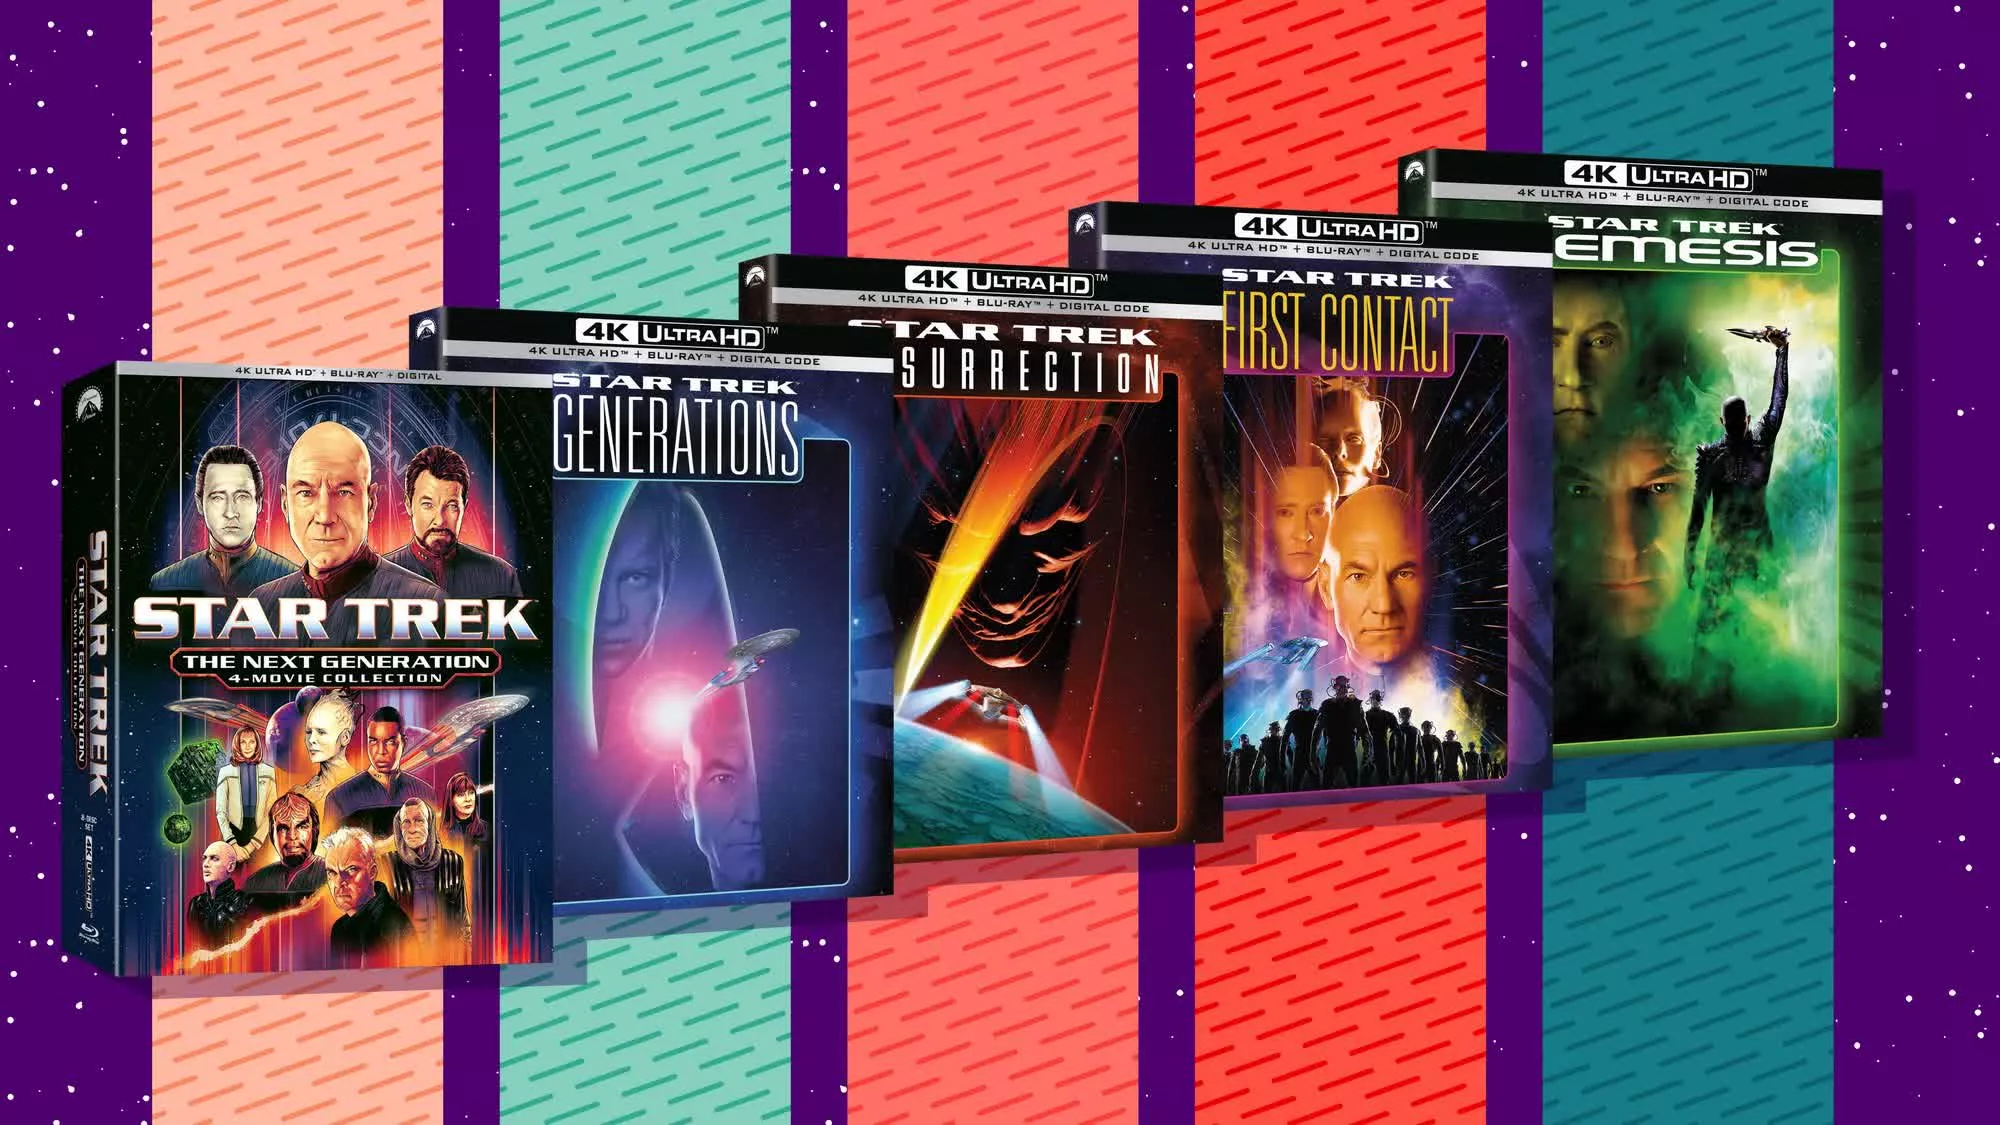 All four Star Trek: The Next Generation movies now available in 4K HDR